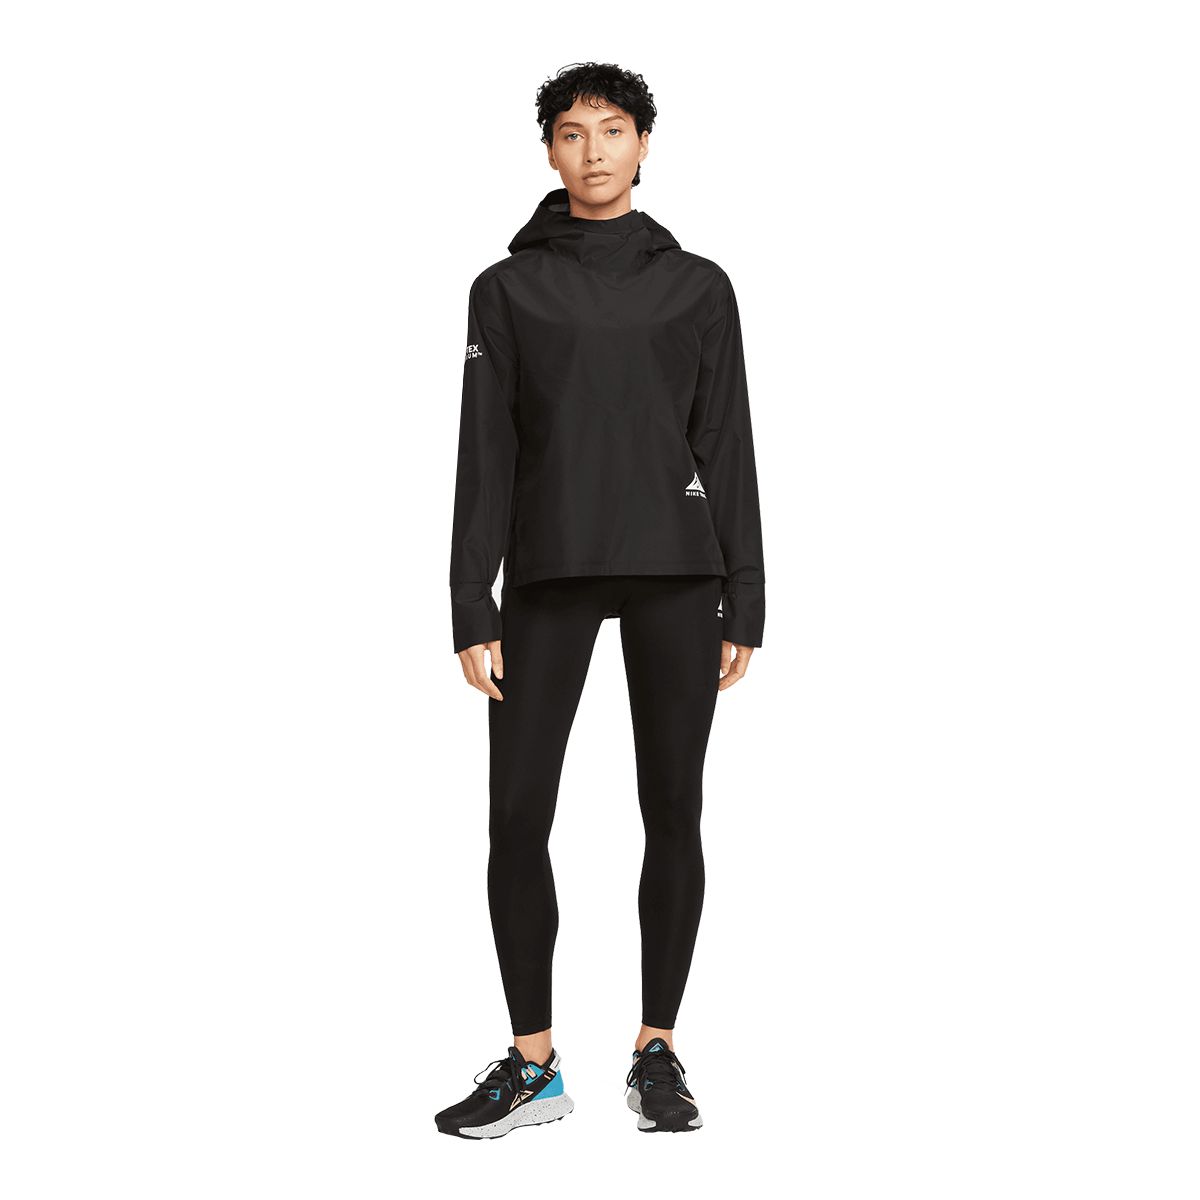 Nike Women's Epic Luxe Trail Mid-Rise Tights